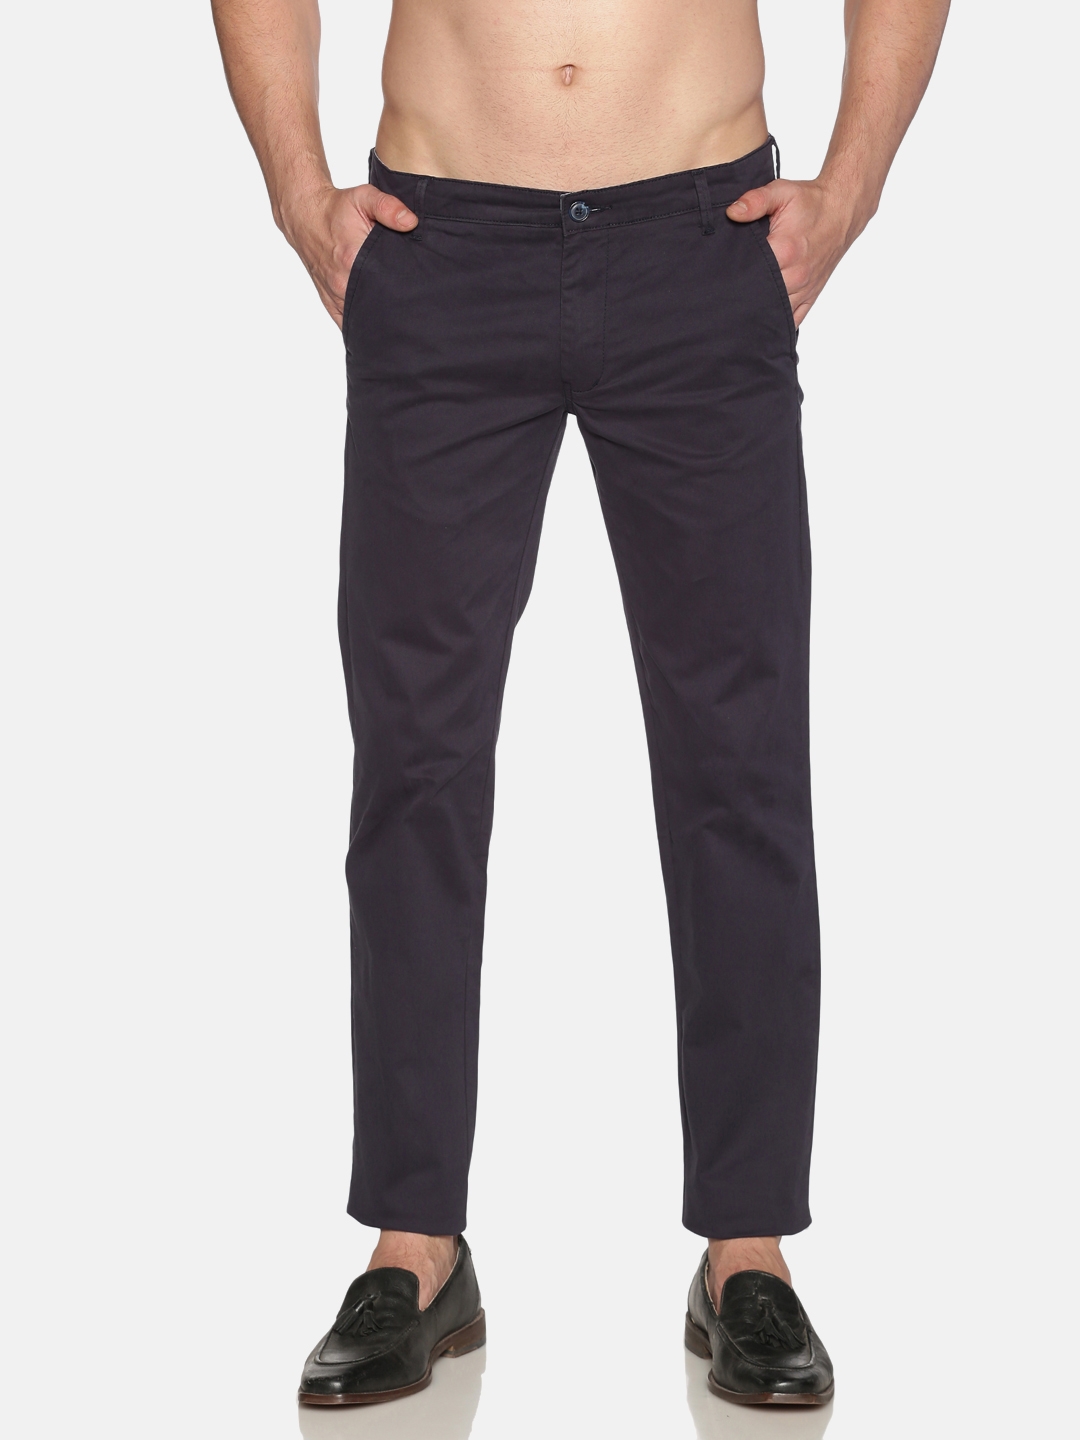 Chennis | Chennis Men's Casual Navy Trousers